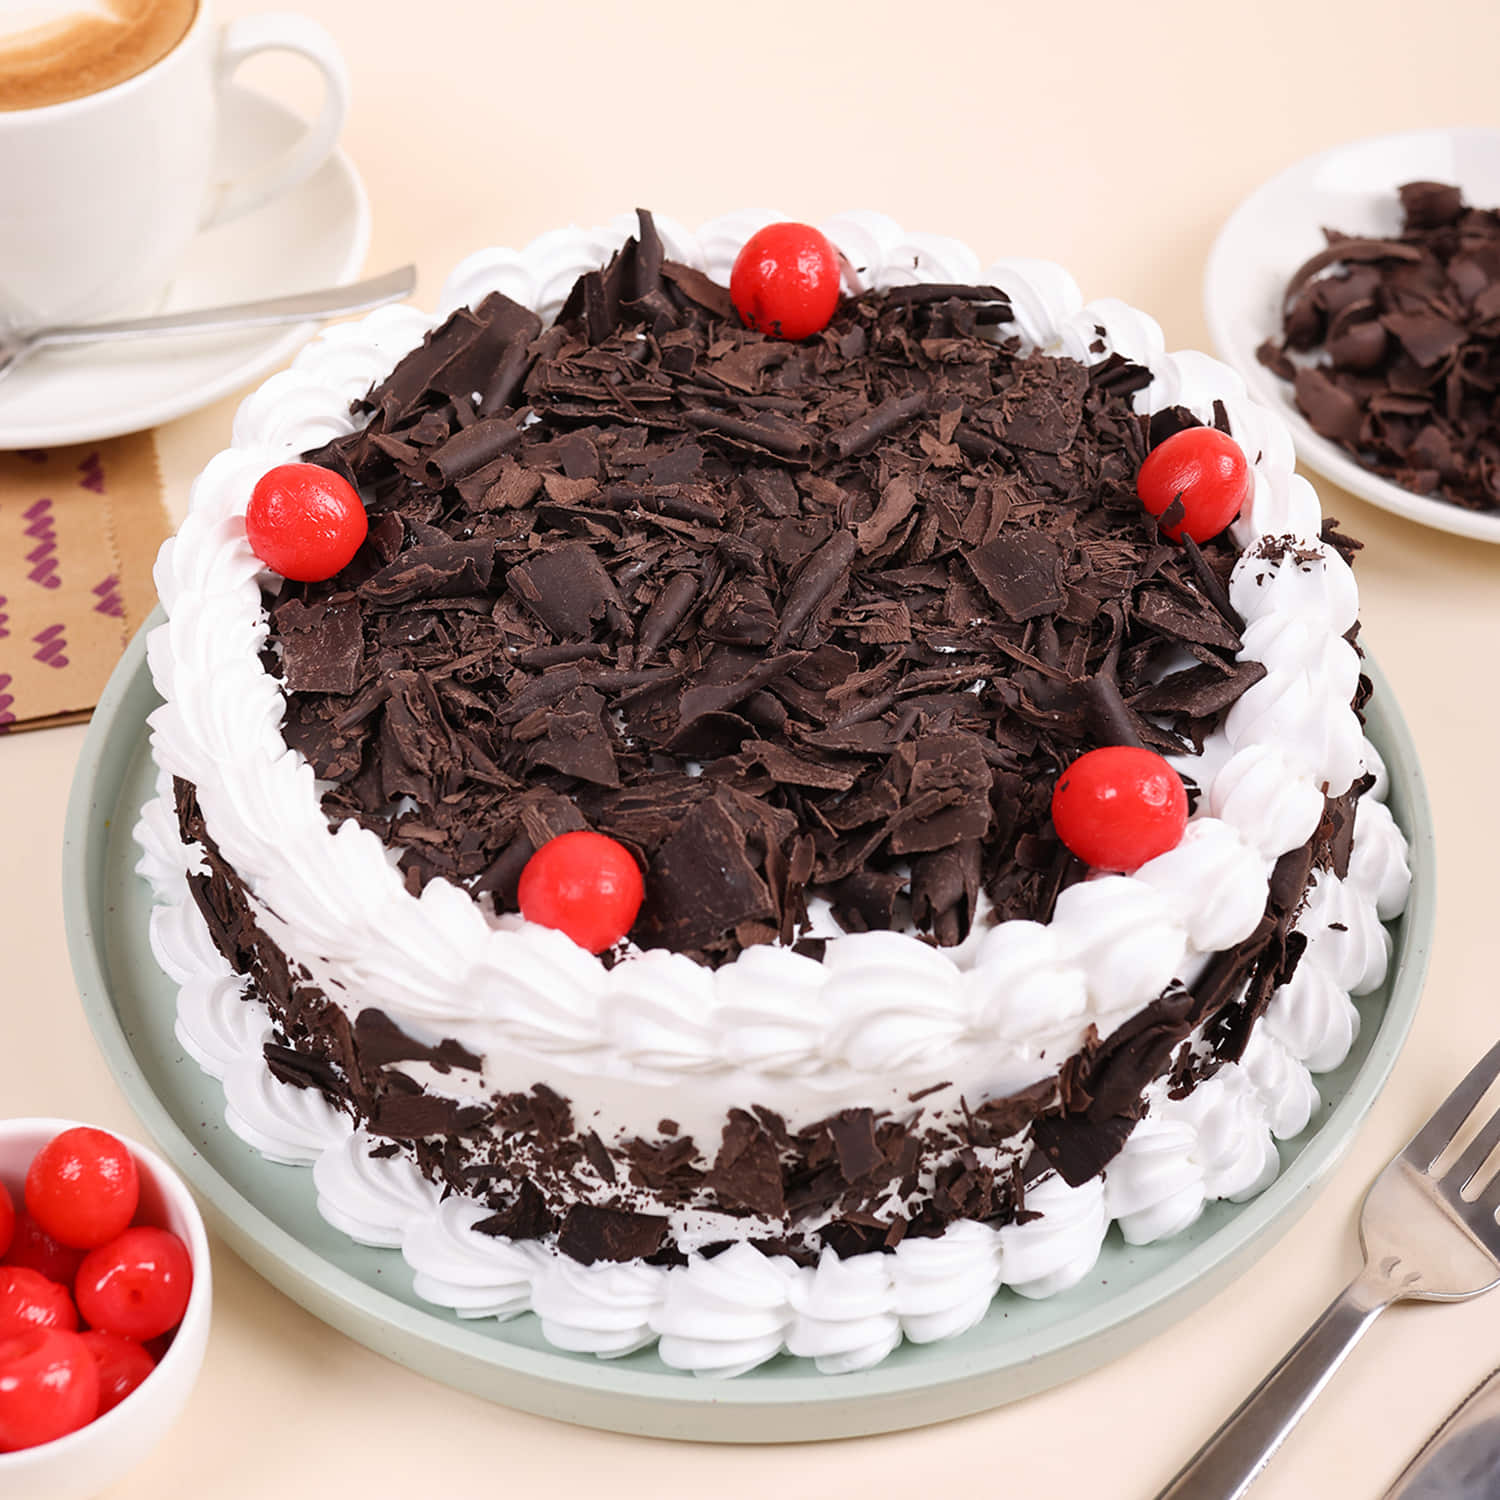 Send The Blackforest Luxury Cake Gifts To mathura